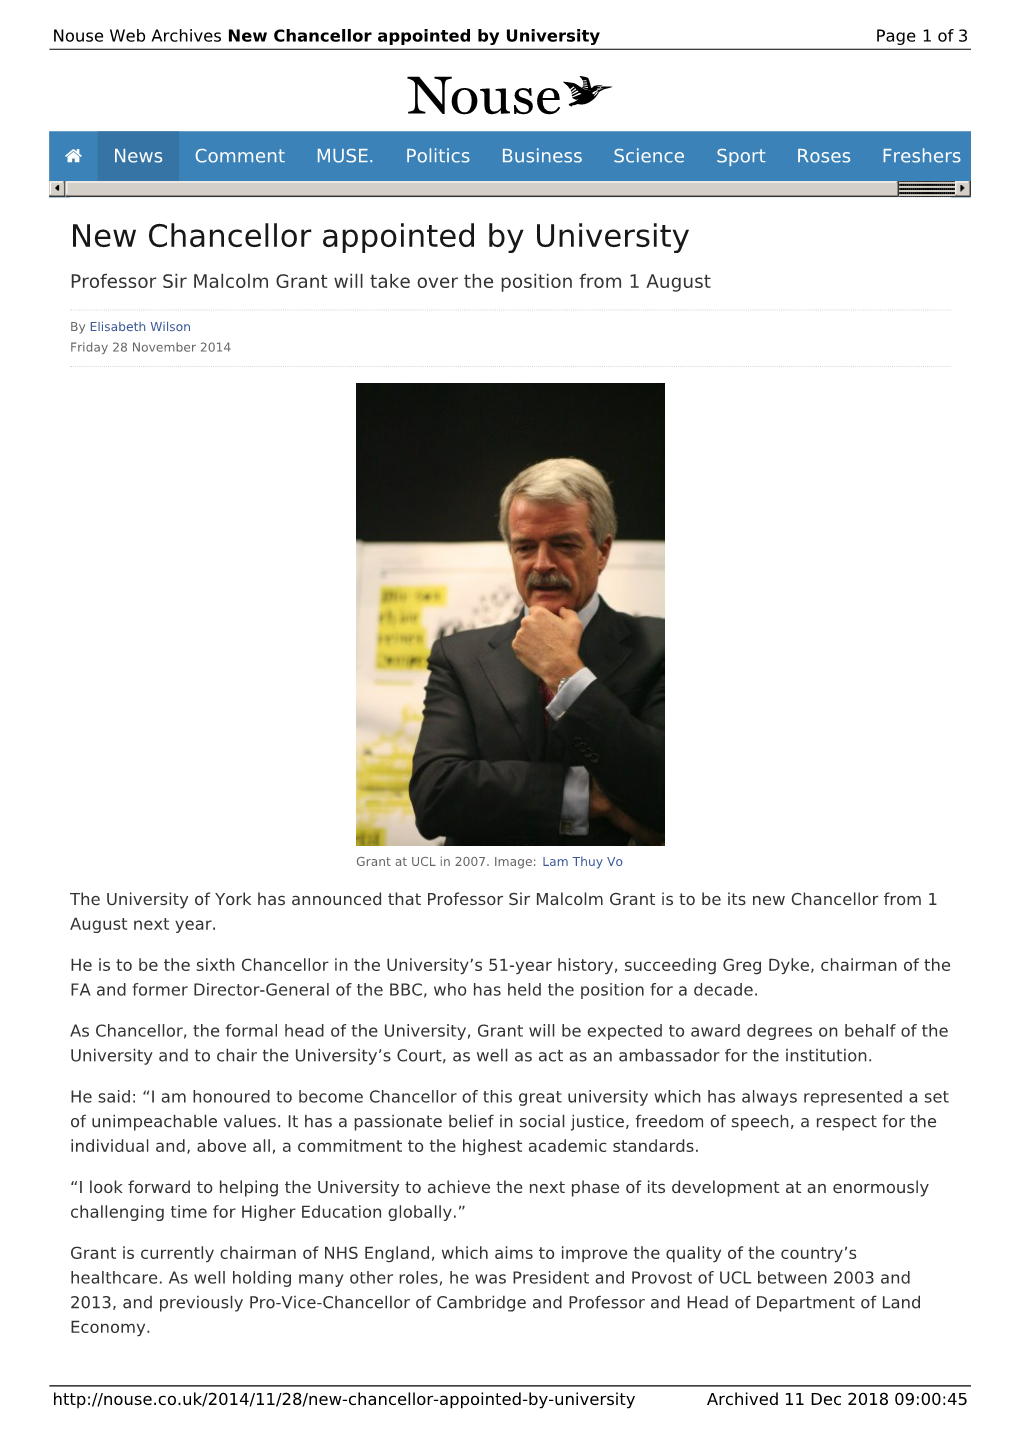 New Chancellor Appointed by University | Nouse